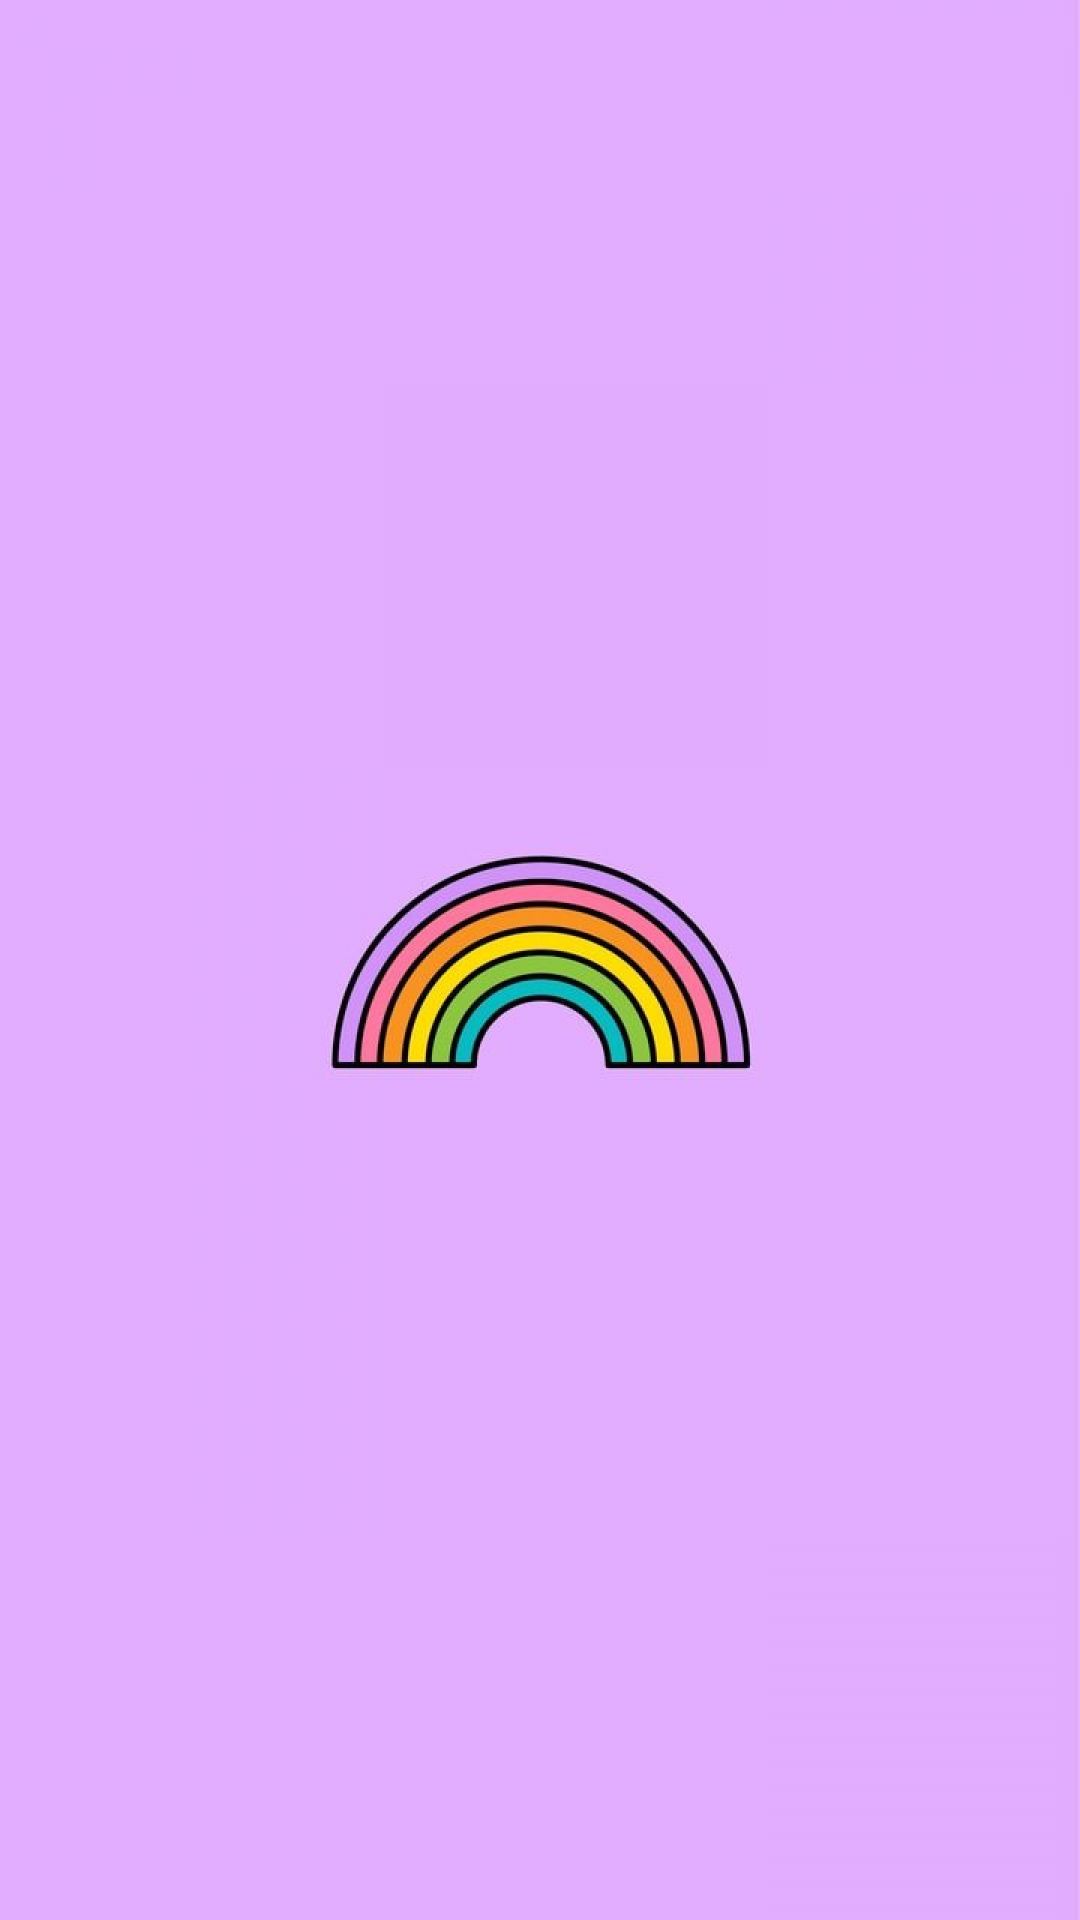 A rainbow is shown on the purple background - Gay, pride, LGBT